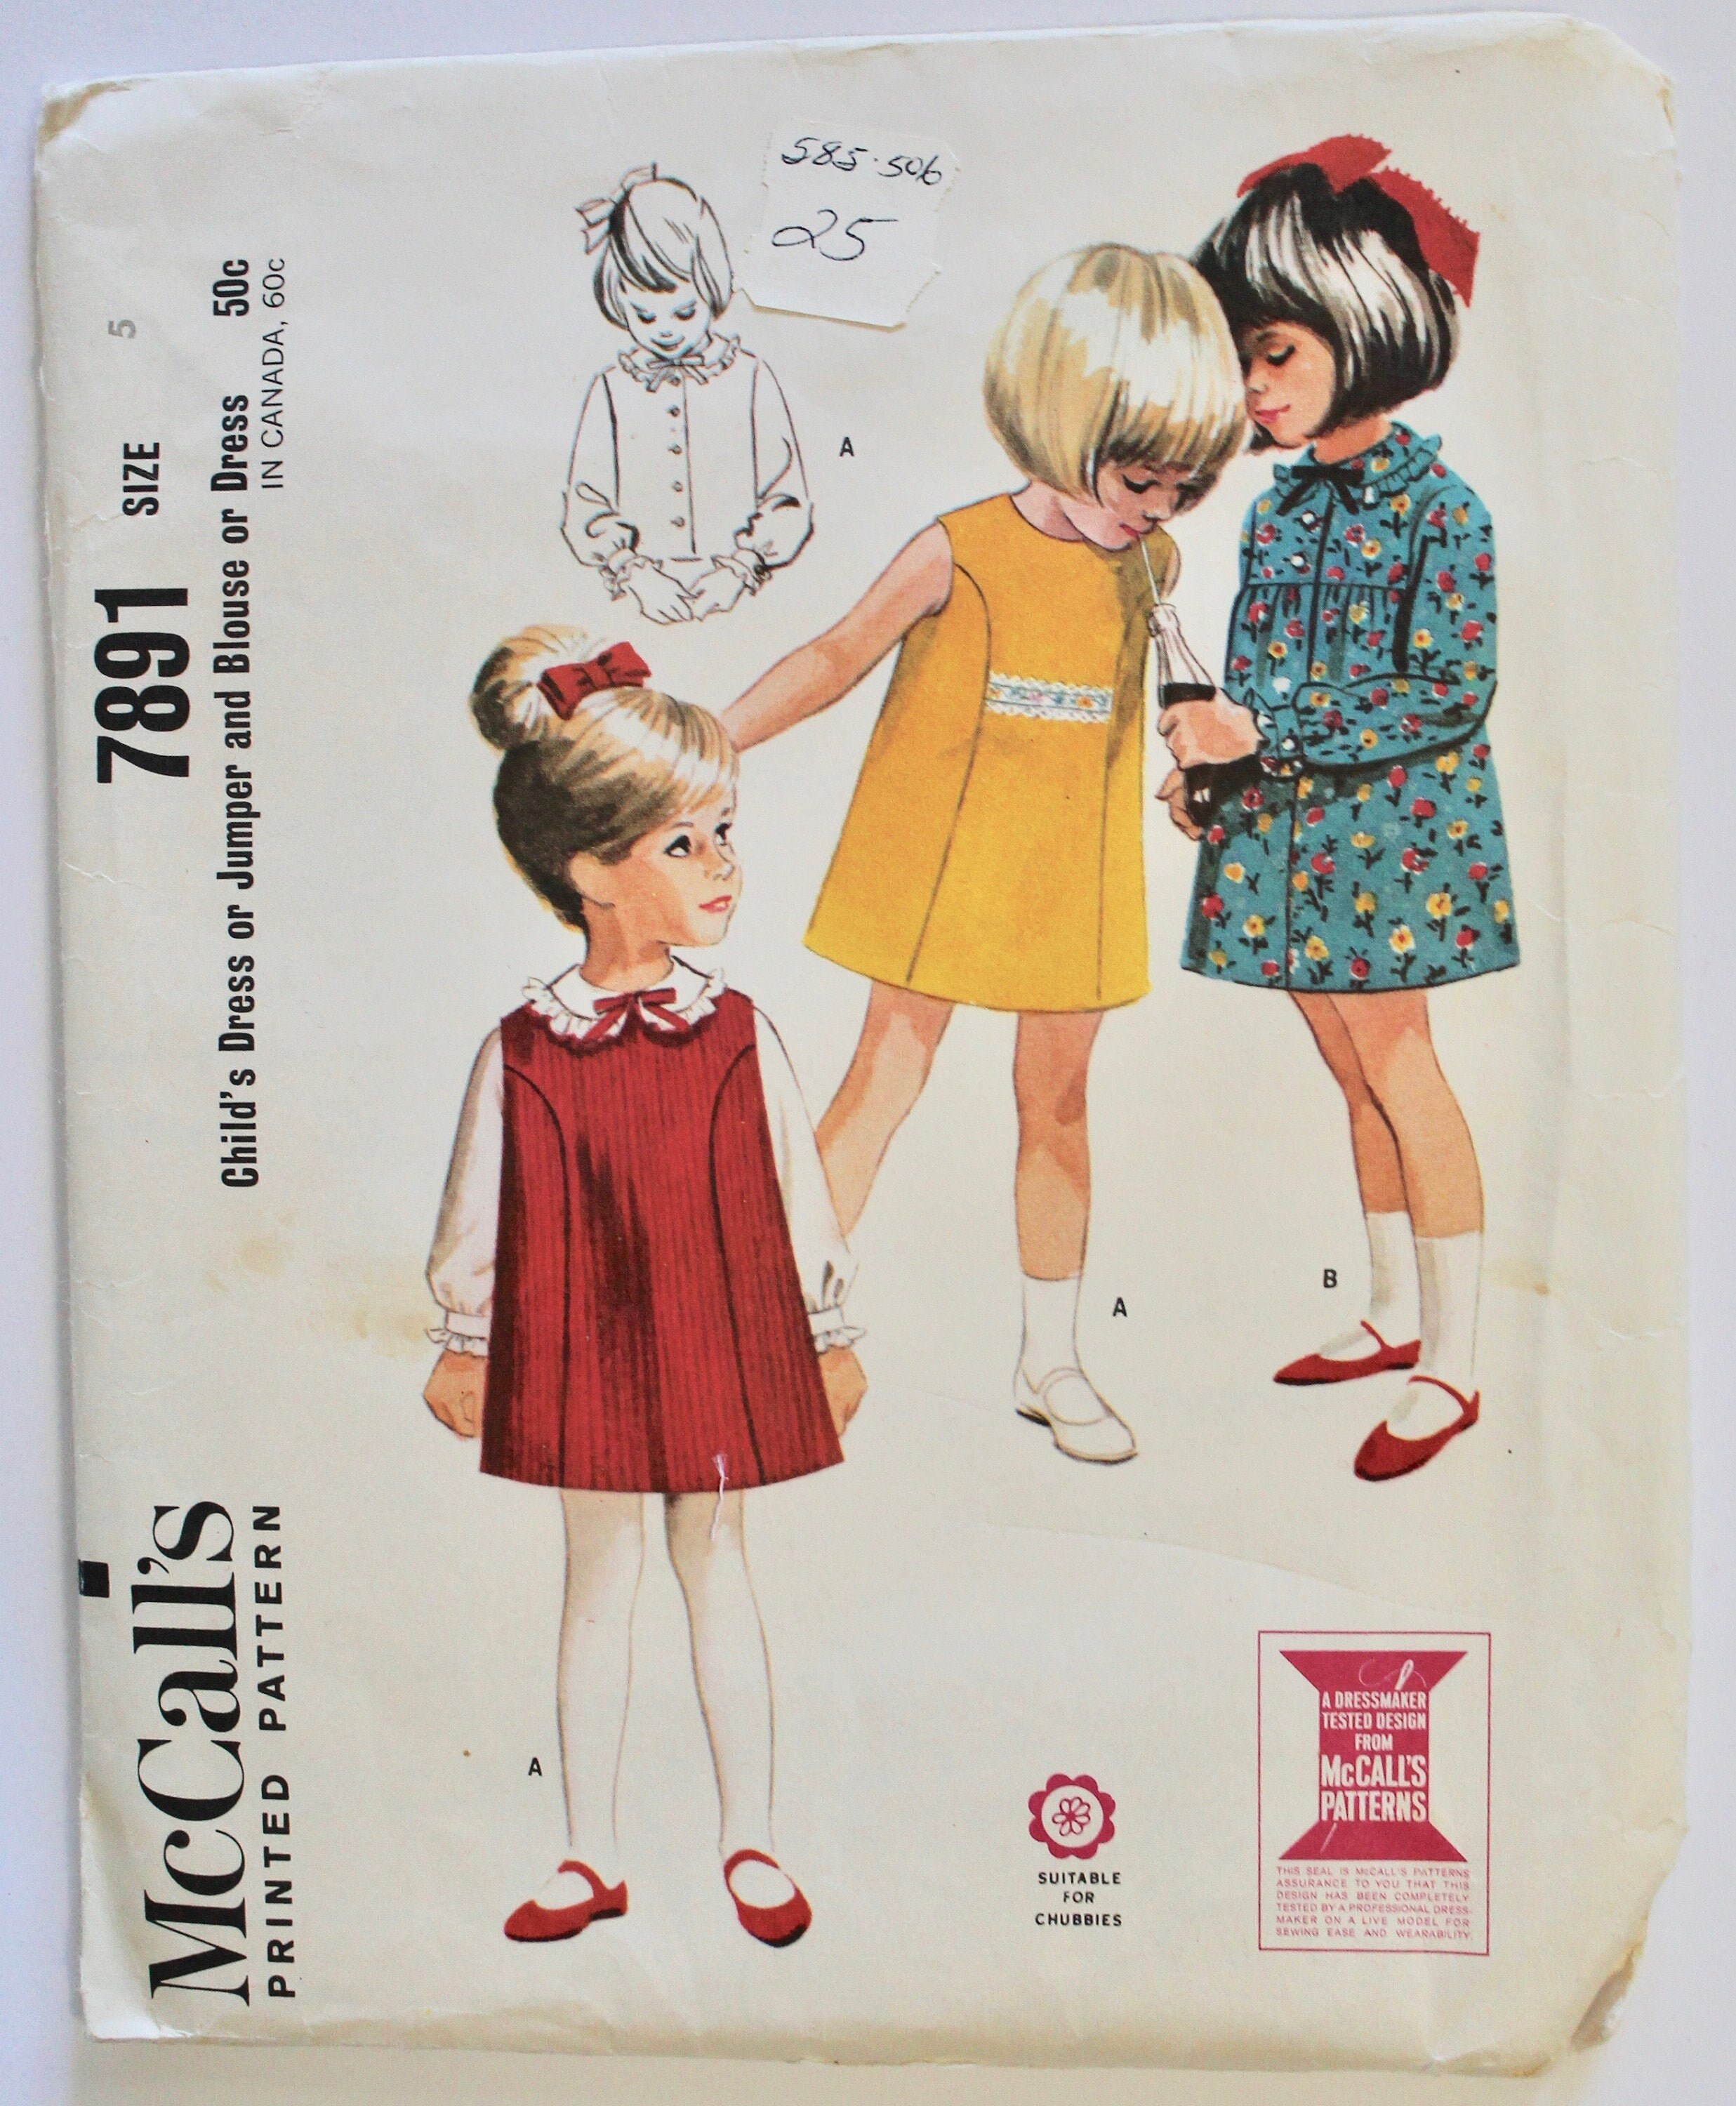 McCalls Sewing Pattern 5793 Children's Special Occasion Wear Sizes: 6-7-8